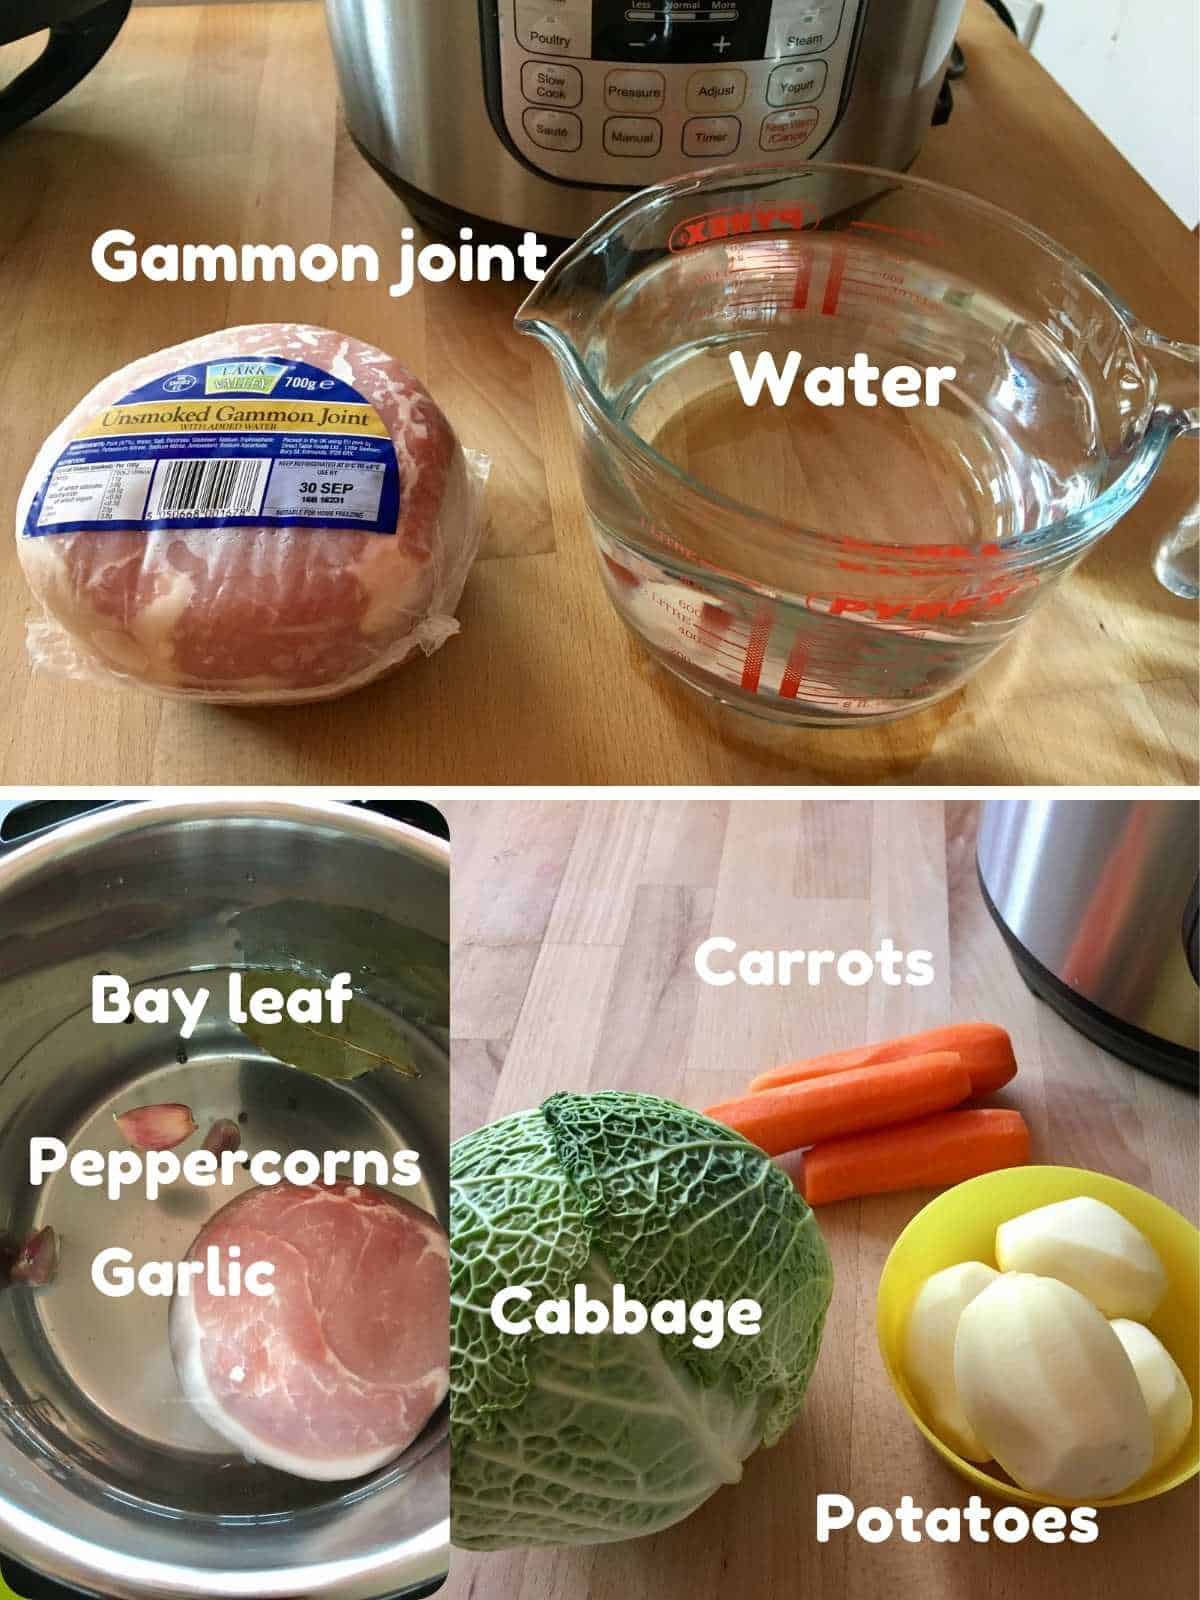 Ingredients for Instant Pot Ham and Cabbage soup shown in a 3 photo collage: at the top the gammon joint + water. At the bottom two photos: on the left is the gammon joint in the water with the peppercorns, garlic and bay leaf and on the right the cabbage, potatoes and carrots. All labelled with their names